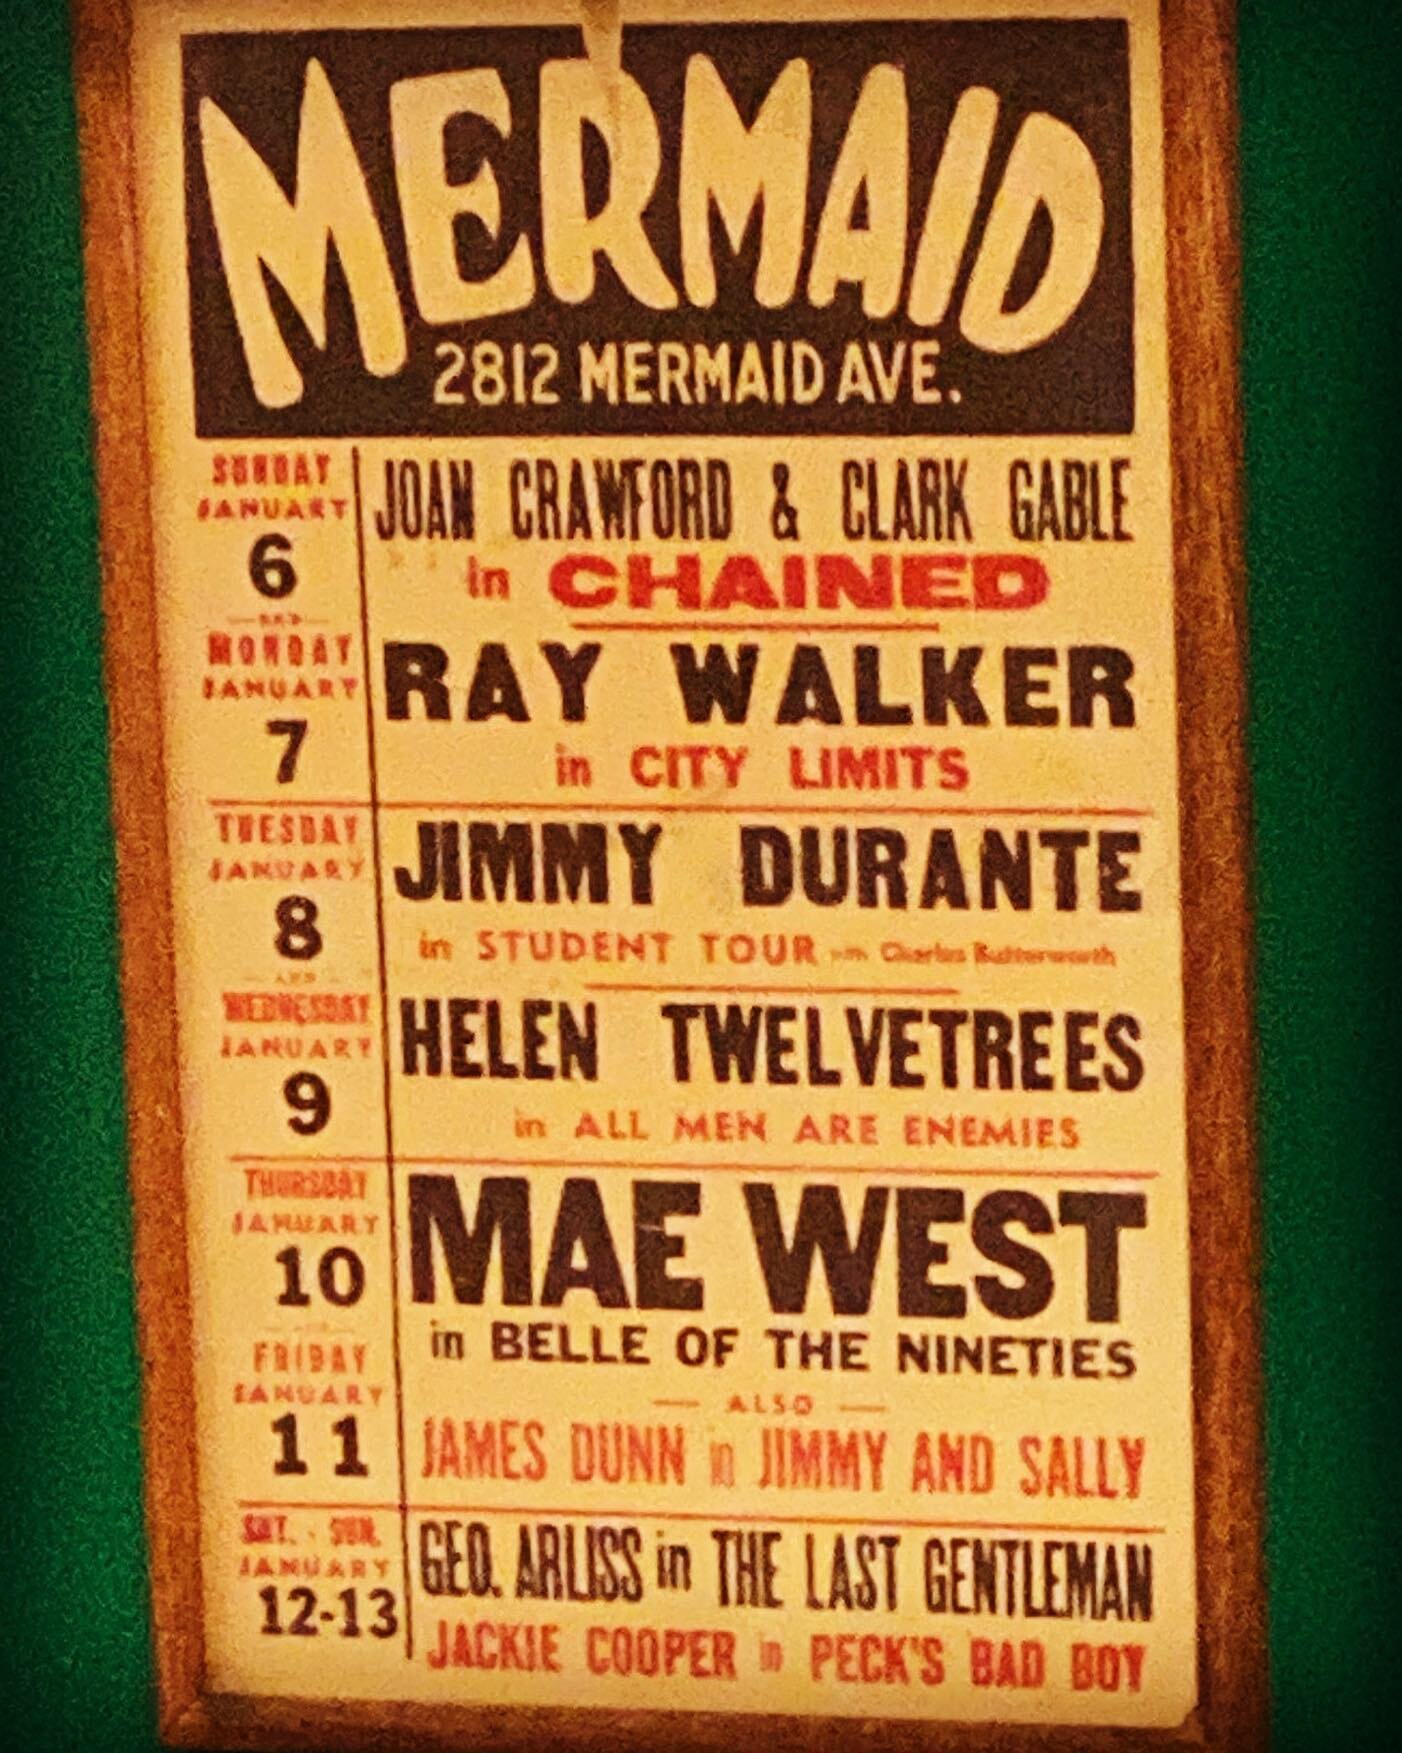 We&rsquo;re celebrating today&rsquo;s opening of the Coney Island Film Festival with this poster from the Museum&rsquo;s collection. The Mermaid Theater (located on Mermaid Avenue) opened in 1921. This poster dates to 1934, featuring a line-up of now